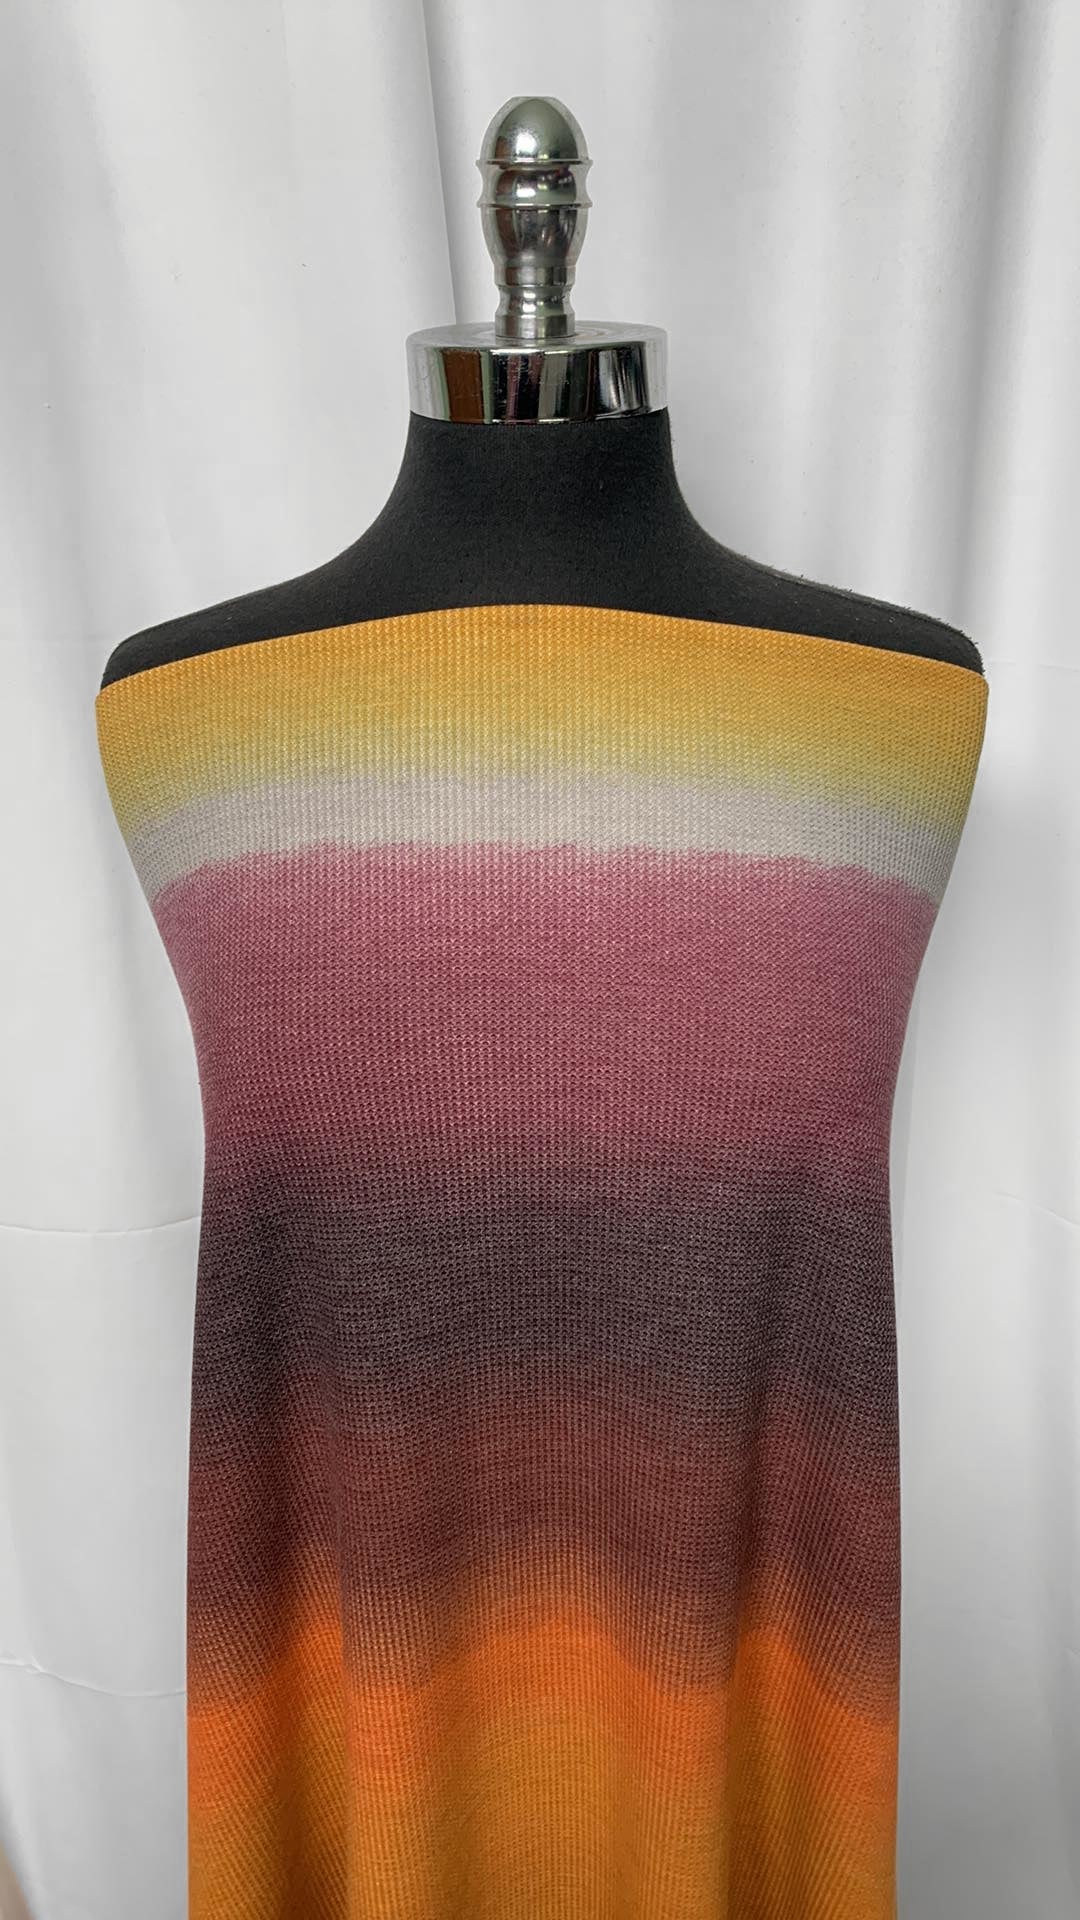 Ombre Day - (Poly/Rayon/Spandex) Thermal Knit - 3 Yard Cut